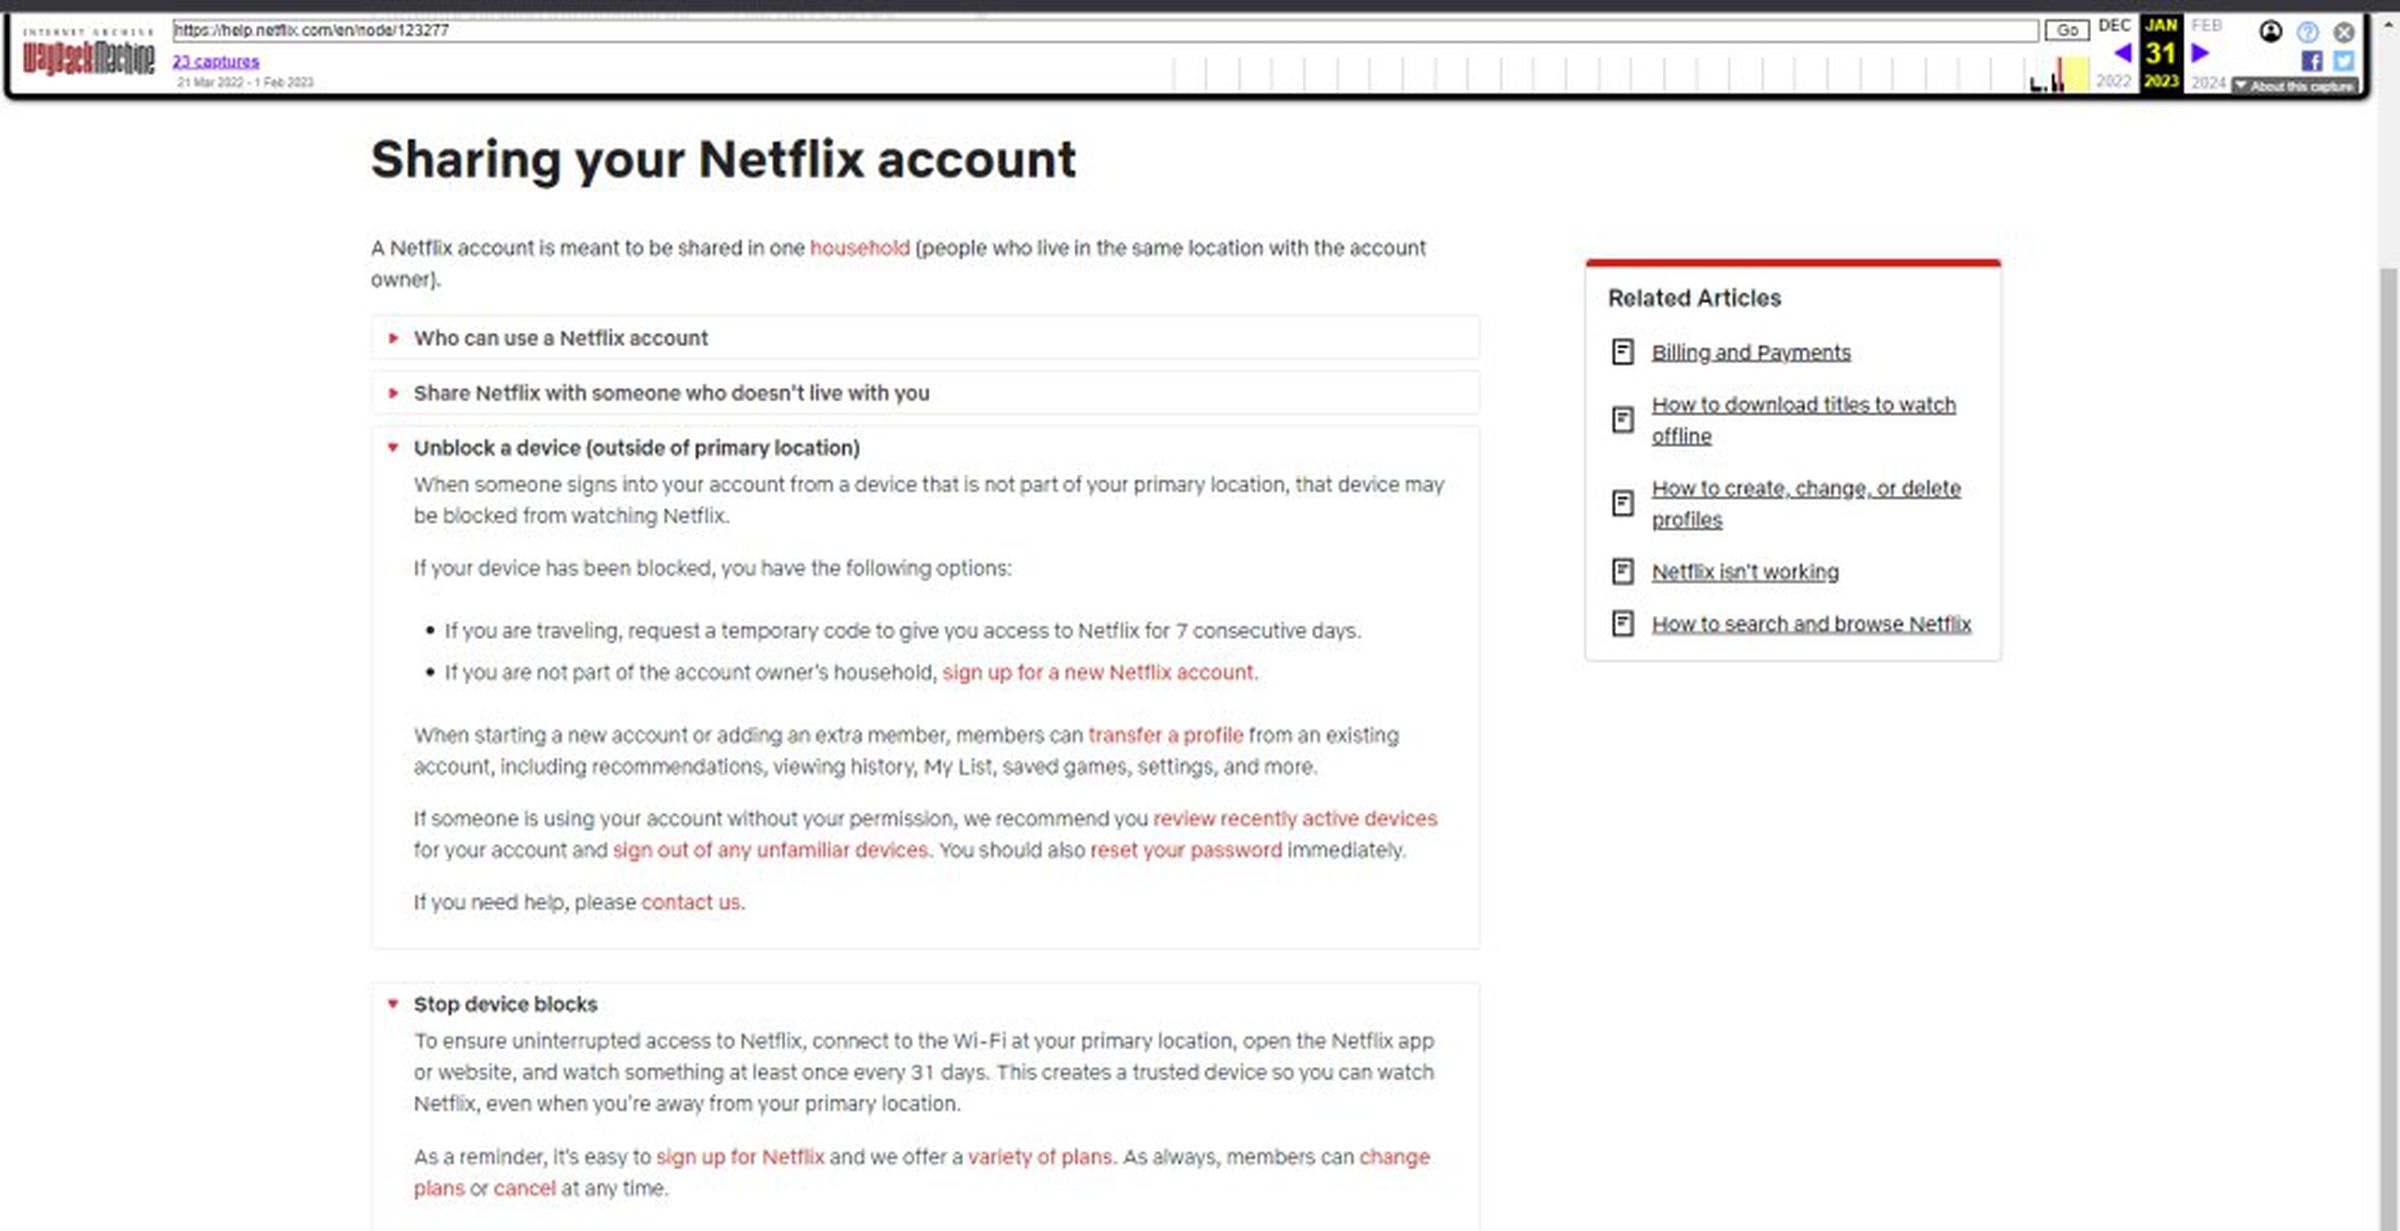 Archived support page says Netflix may block a device 